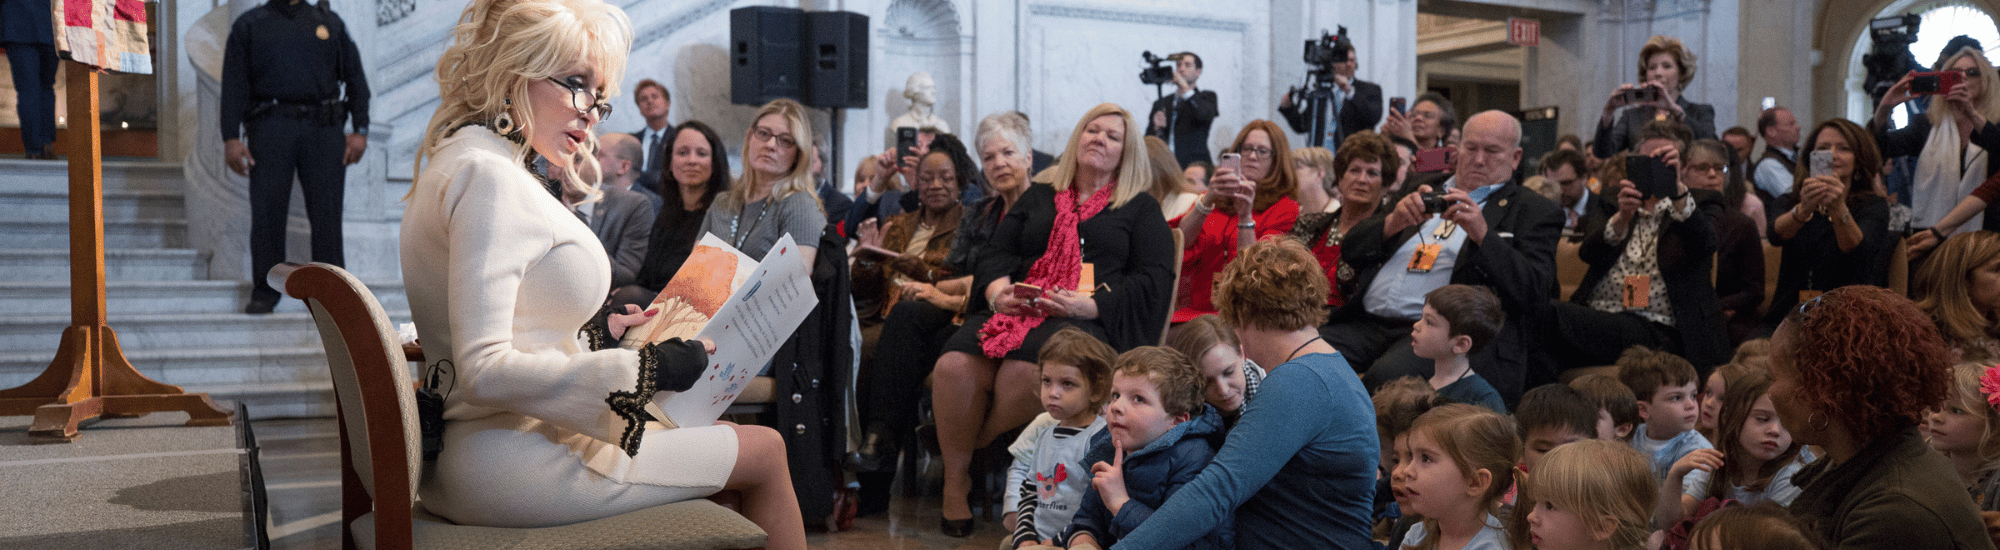 Dolly reads to children at the library of congress